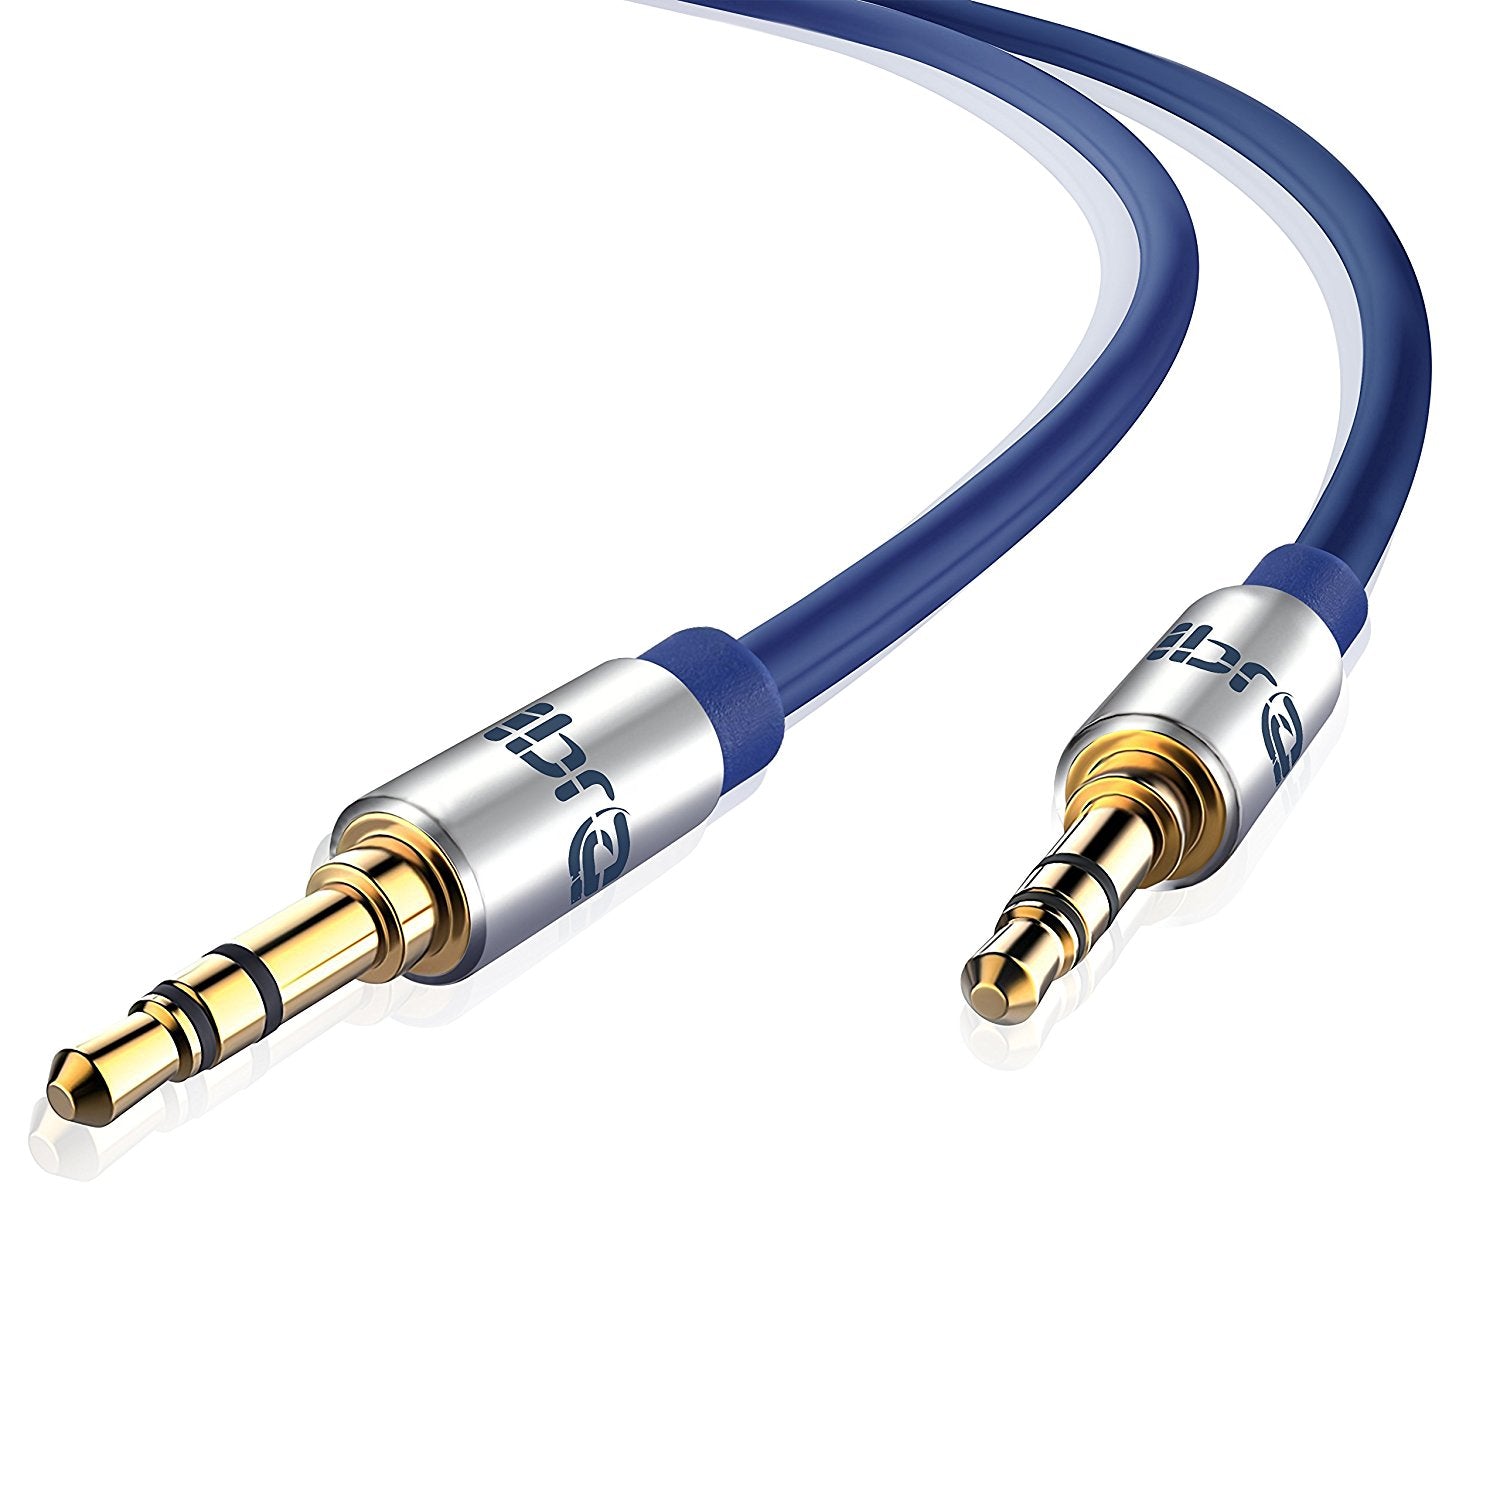 Aux Cable 2M 3.5mm Stereo Pro Auxiliary Audio Cable - for Beats Headphones Apple iPod iPhone iPad Samsung LG Smartphone MP3 Player Home / Car etc - IBRA Blue